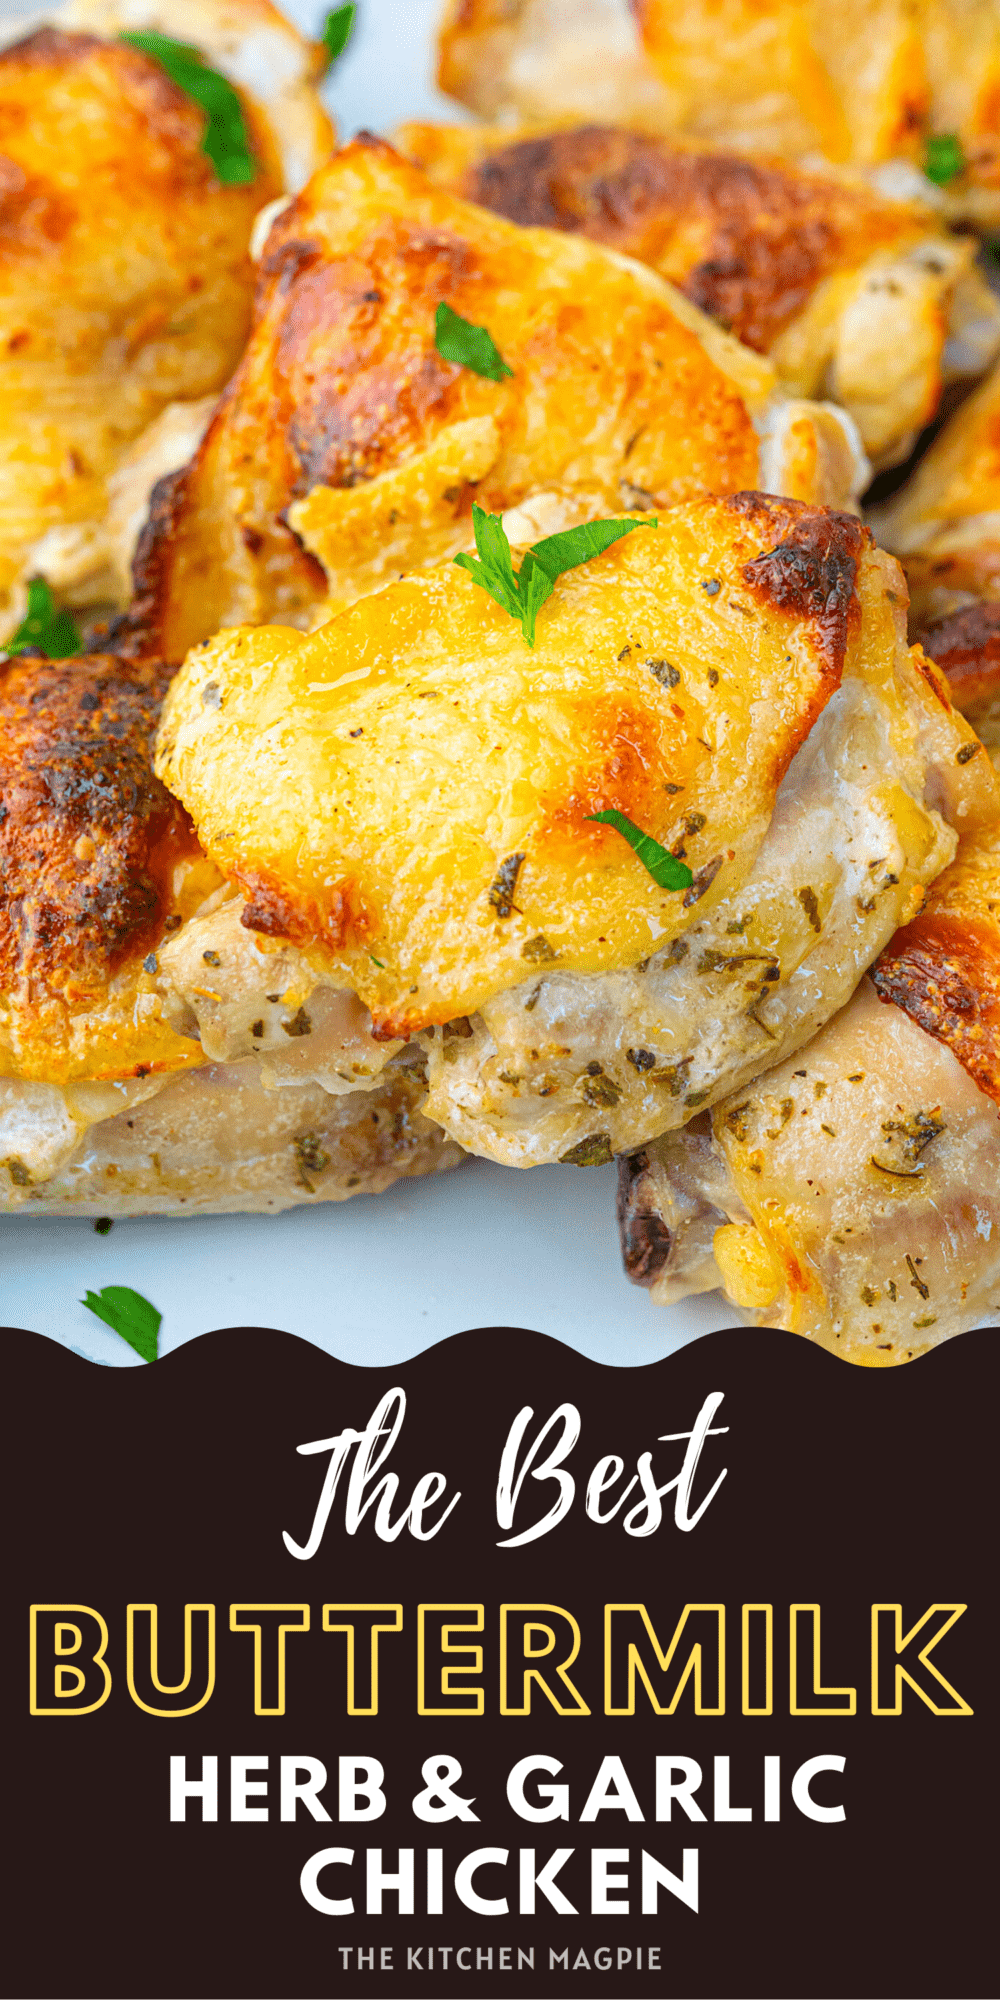 This oven baked buttermilk chicken is tender, juicy and bakes up perfectly for dinner thanks to a garlic and herb seasoned buttermilk marinade. 